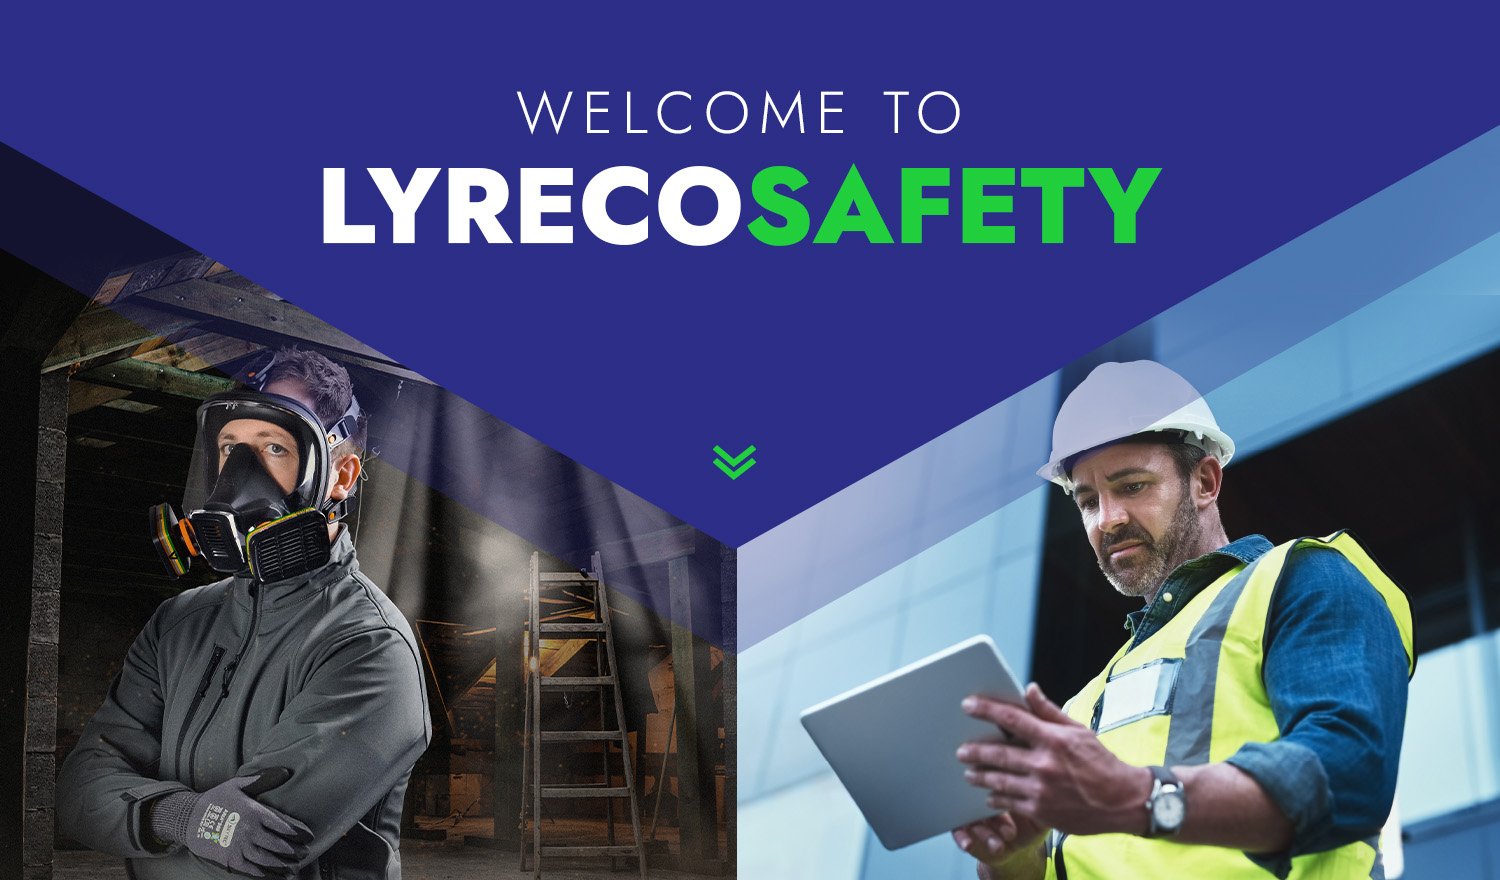 Welcome to Lyreco Safety